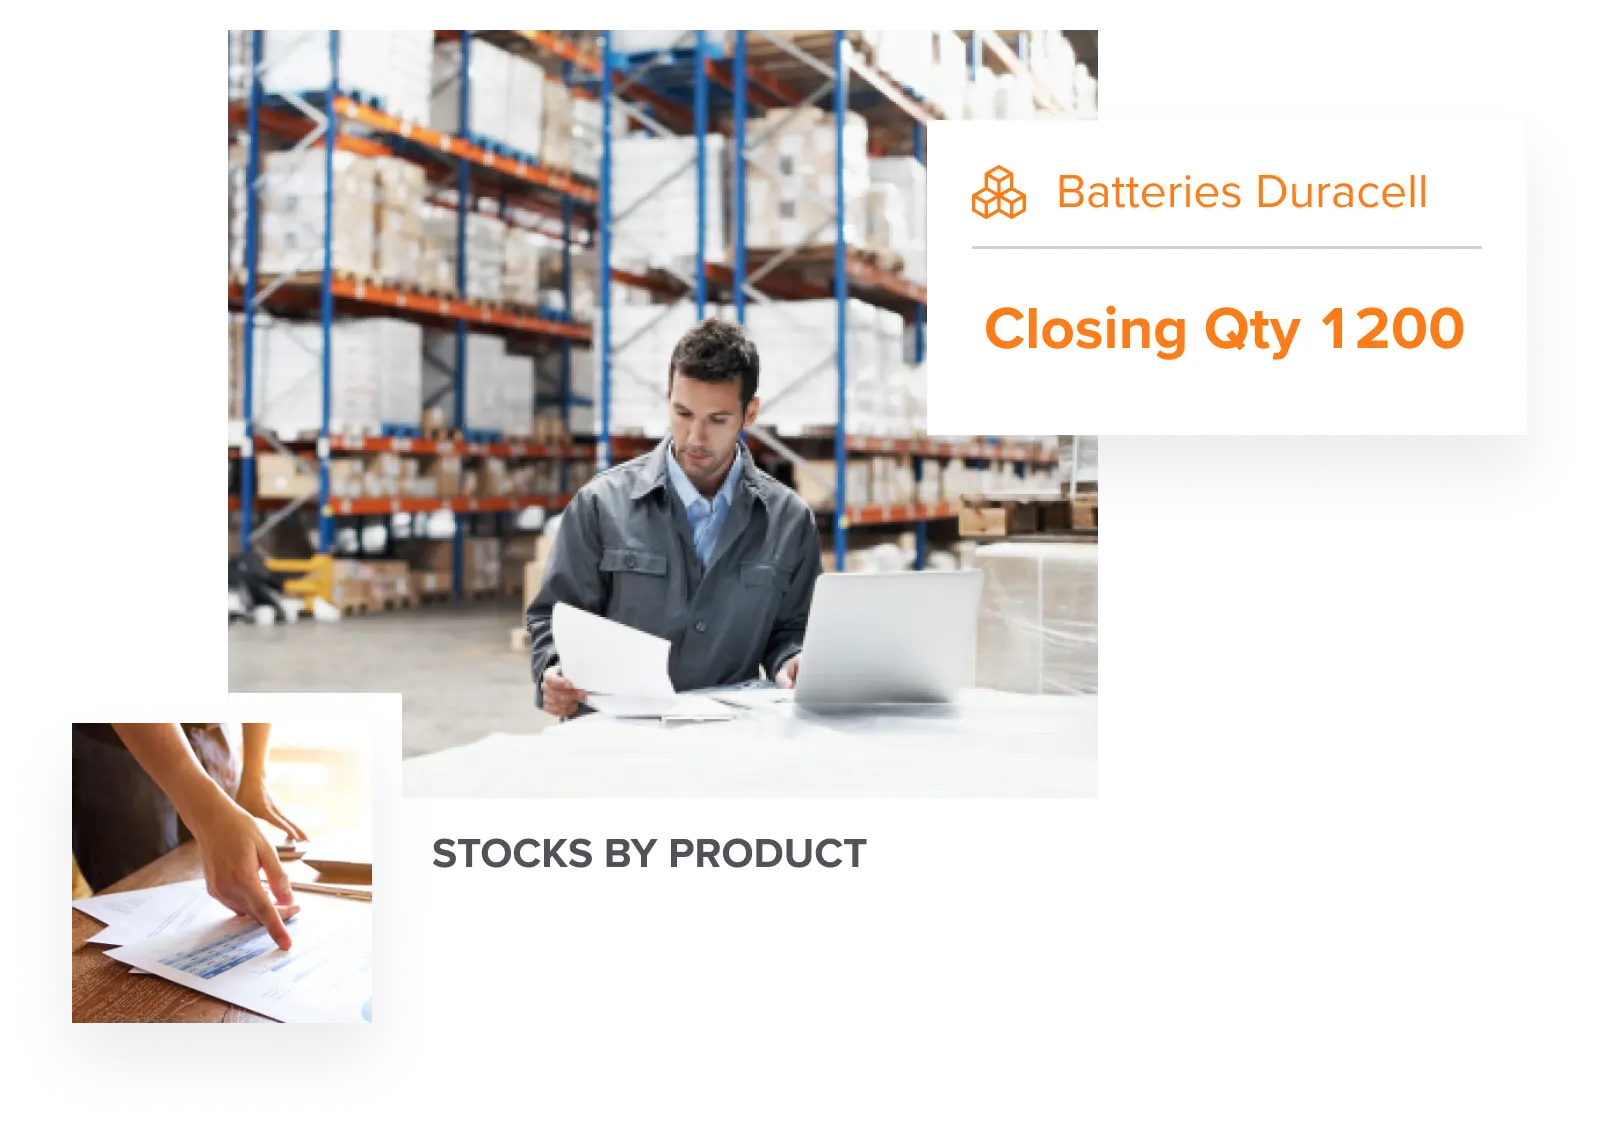 distributo-electrical-goods-distribution-inventory-management